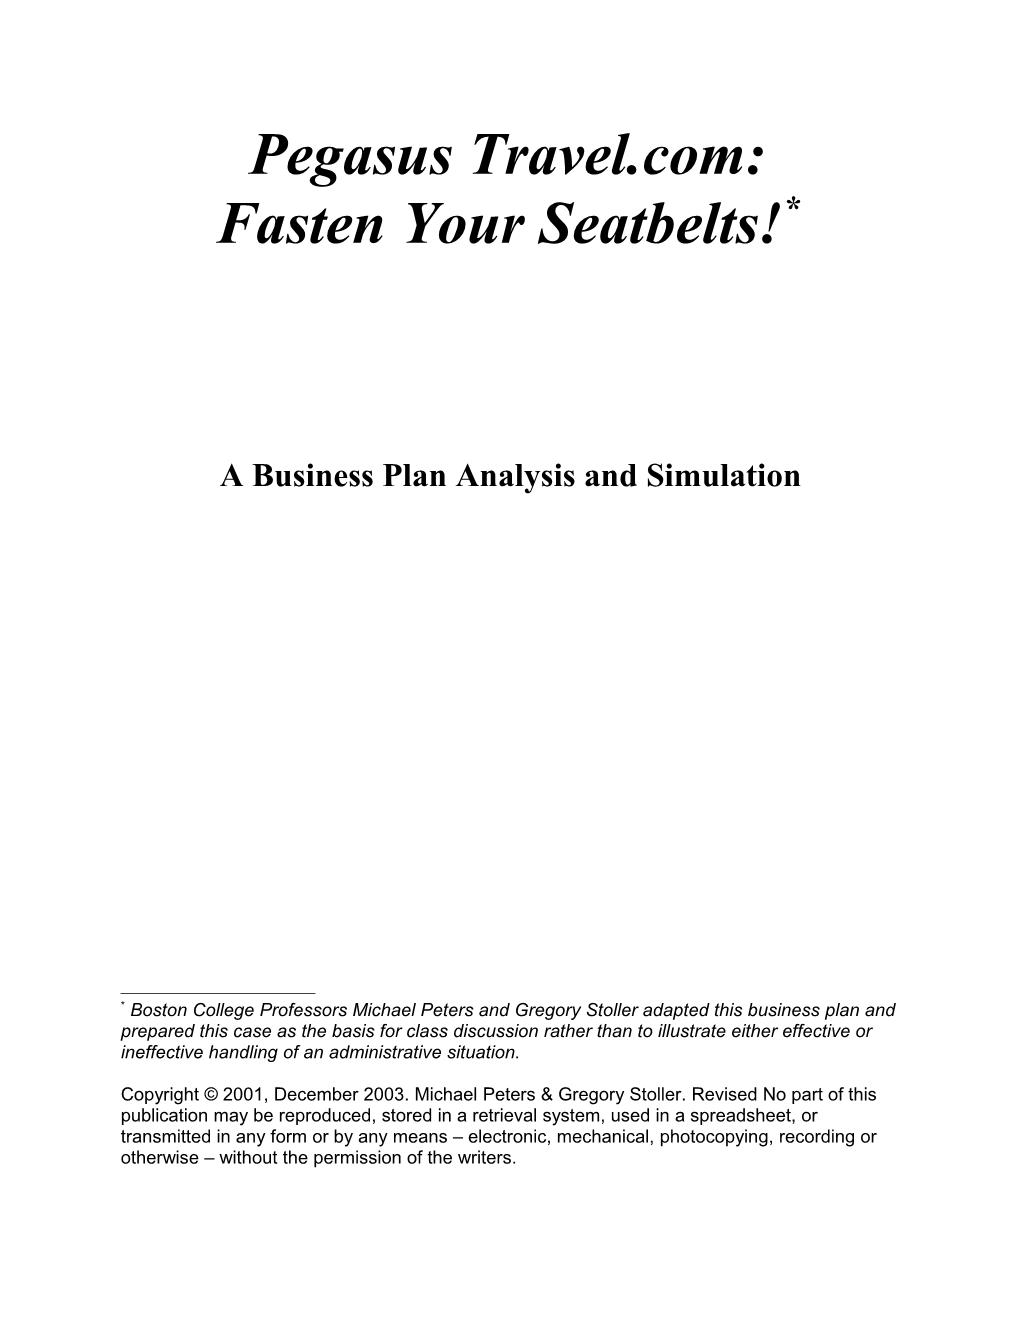 A Business Plan Analysis and Simulation